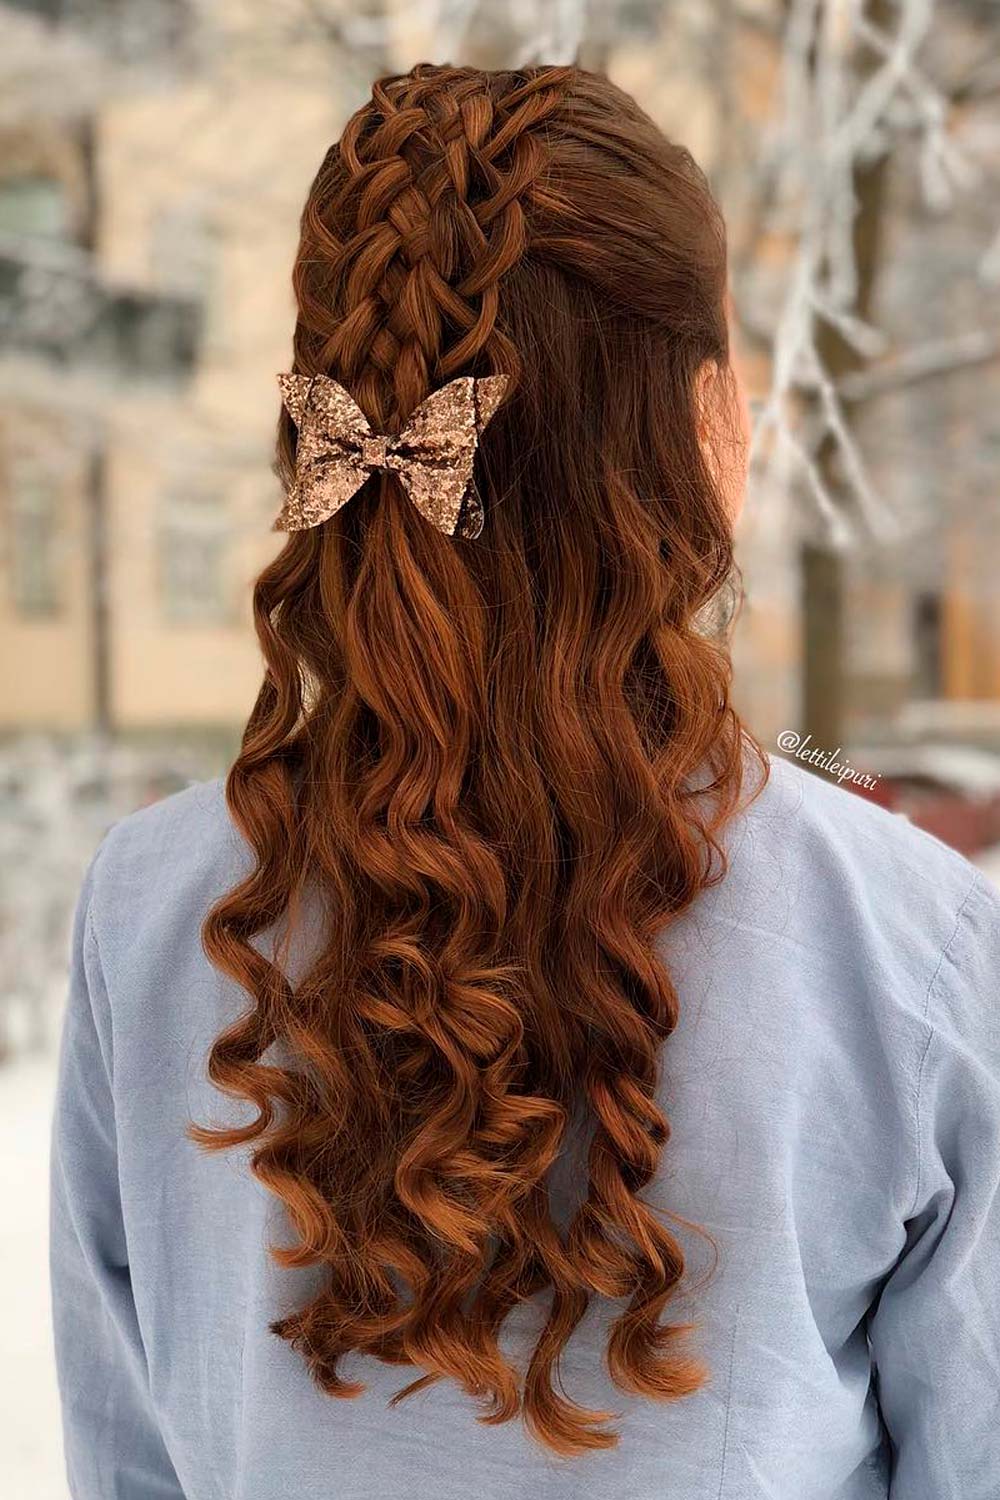 55 Christmas Hairstyles Ideas For 2022 Holidays - Love Hairstyles